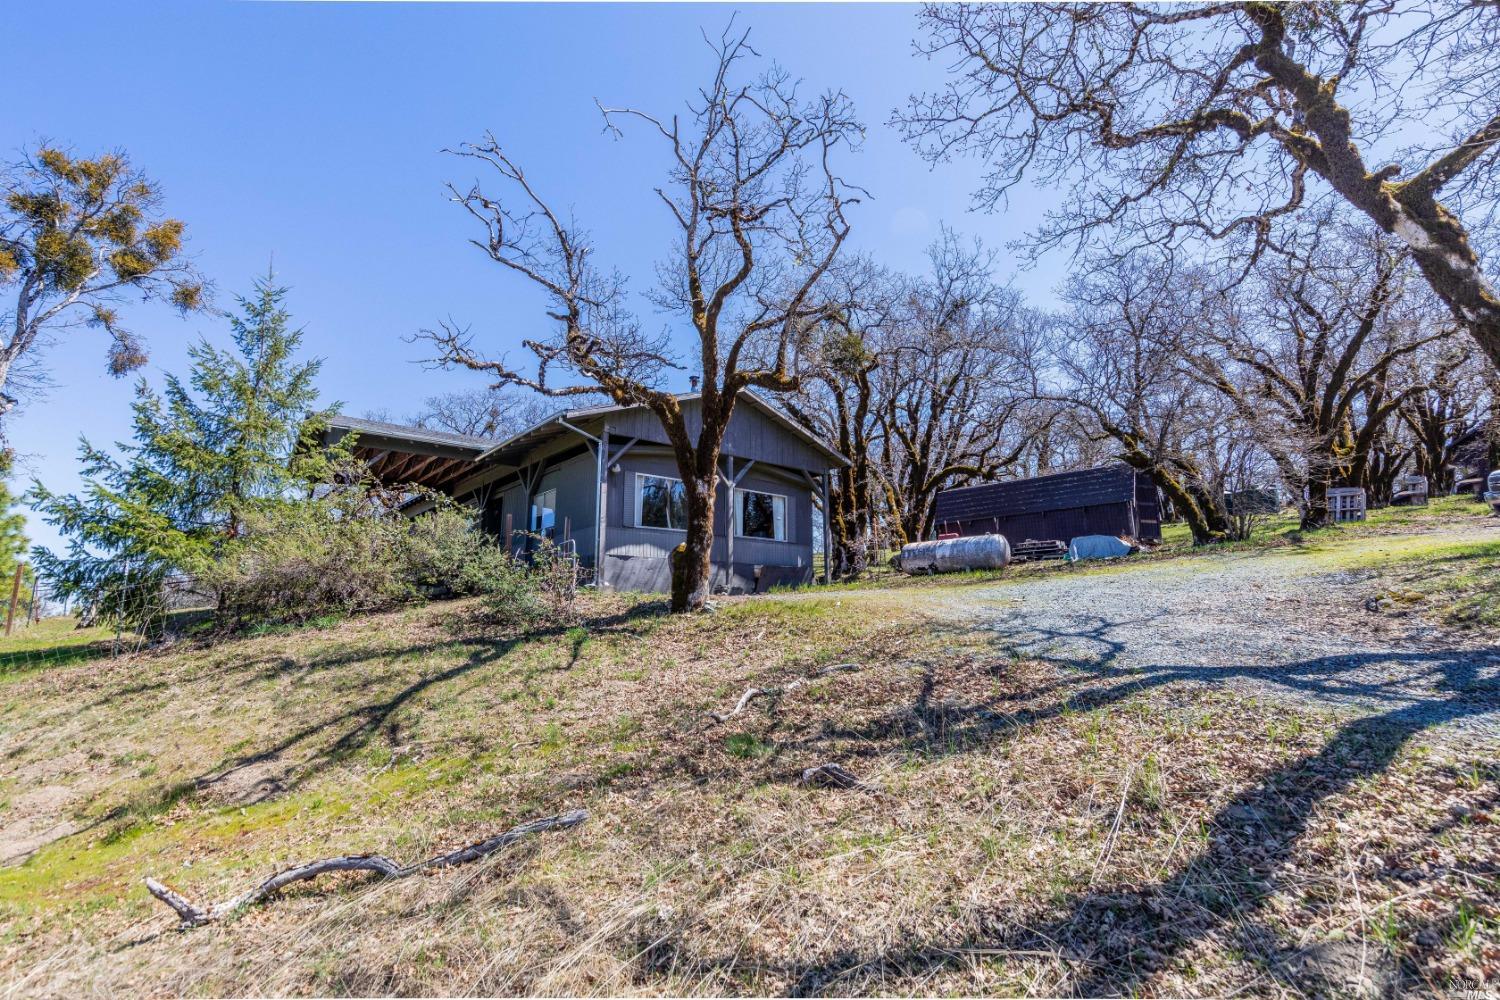 Photo of 60951 Bell Springs Rd in Laytonville, CA